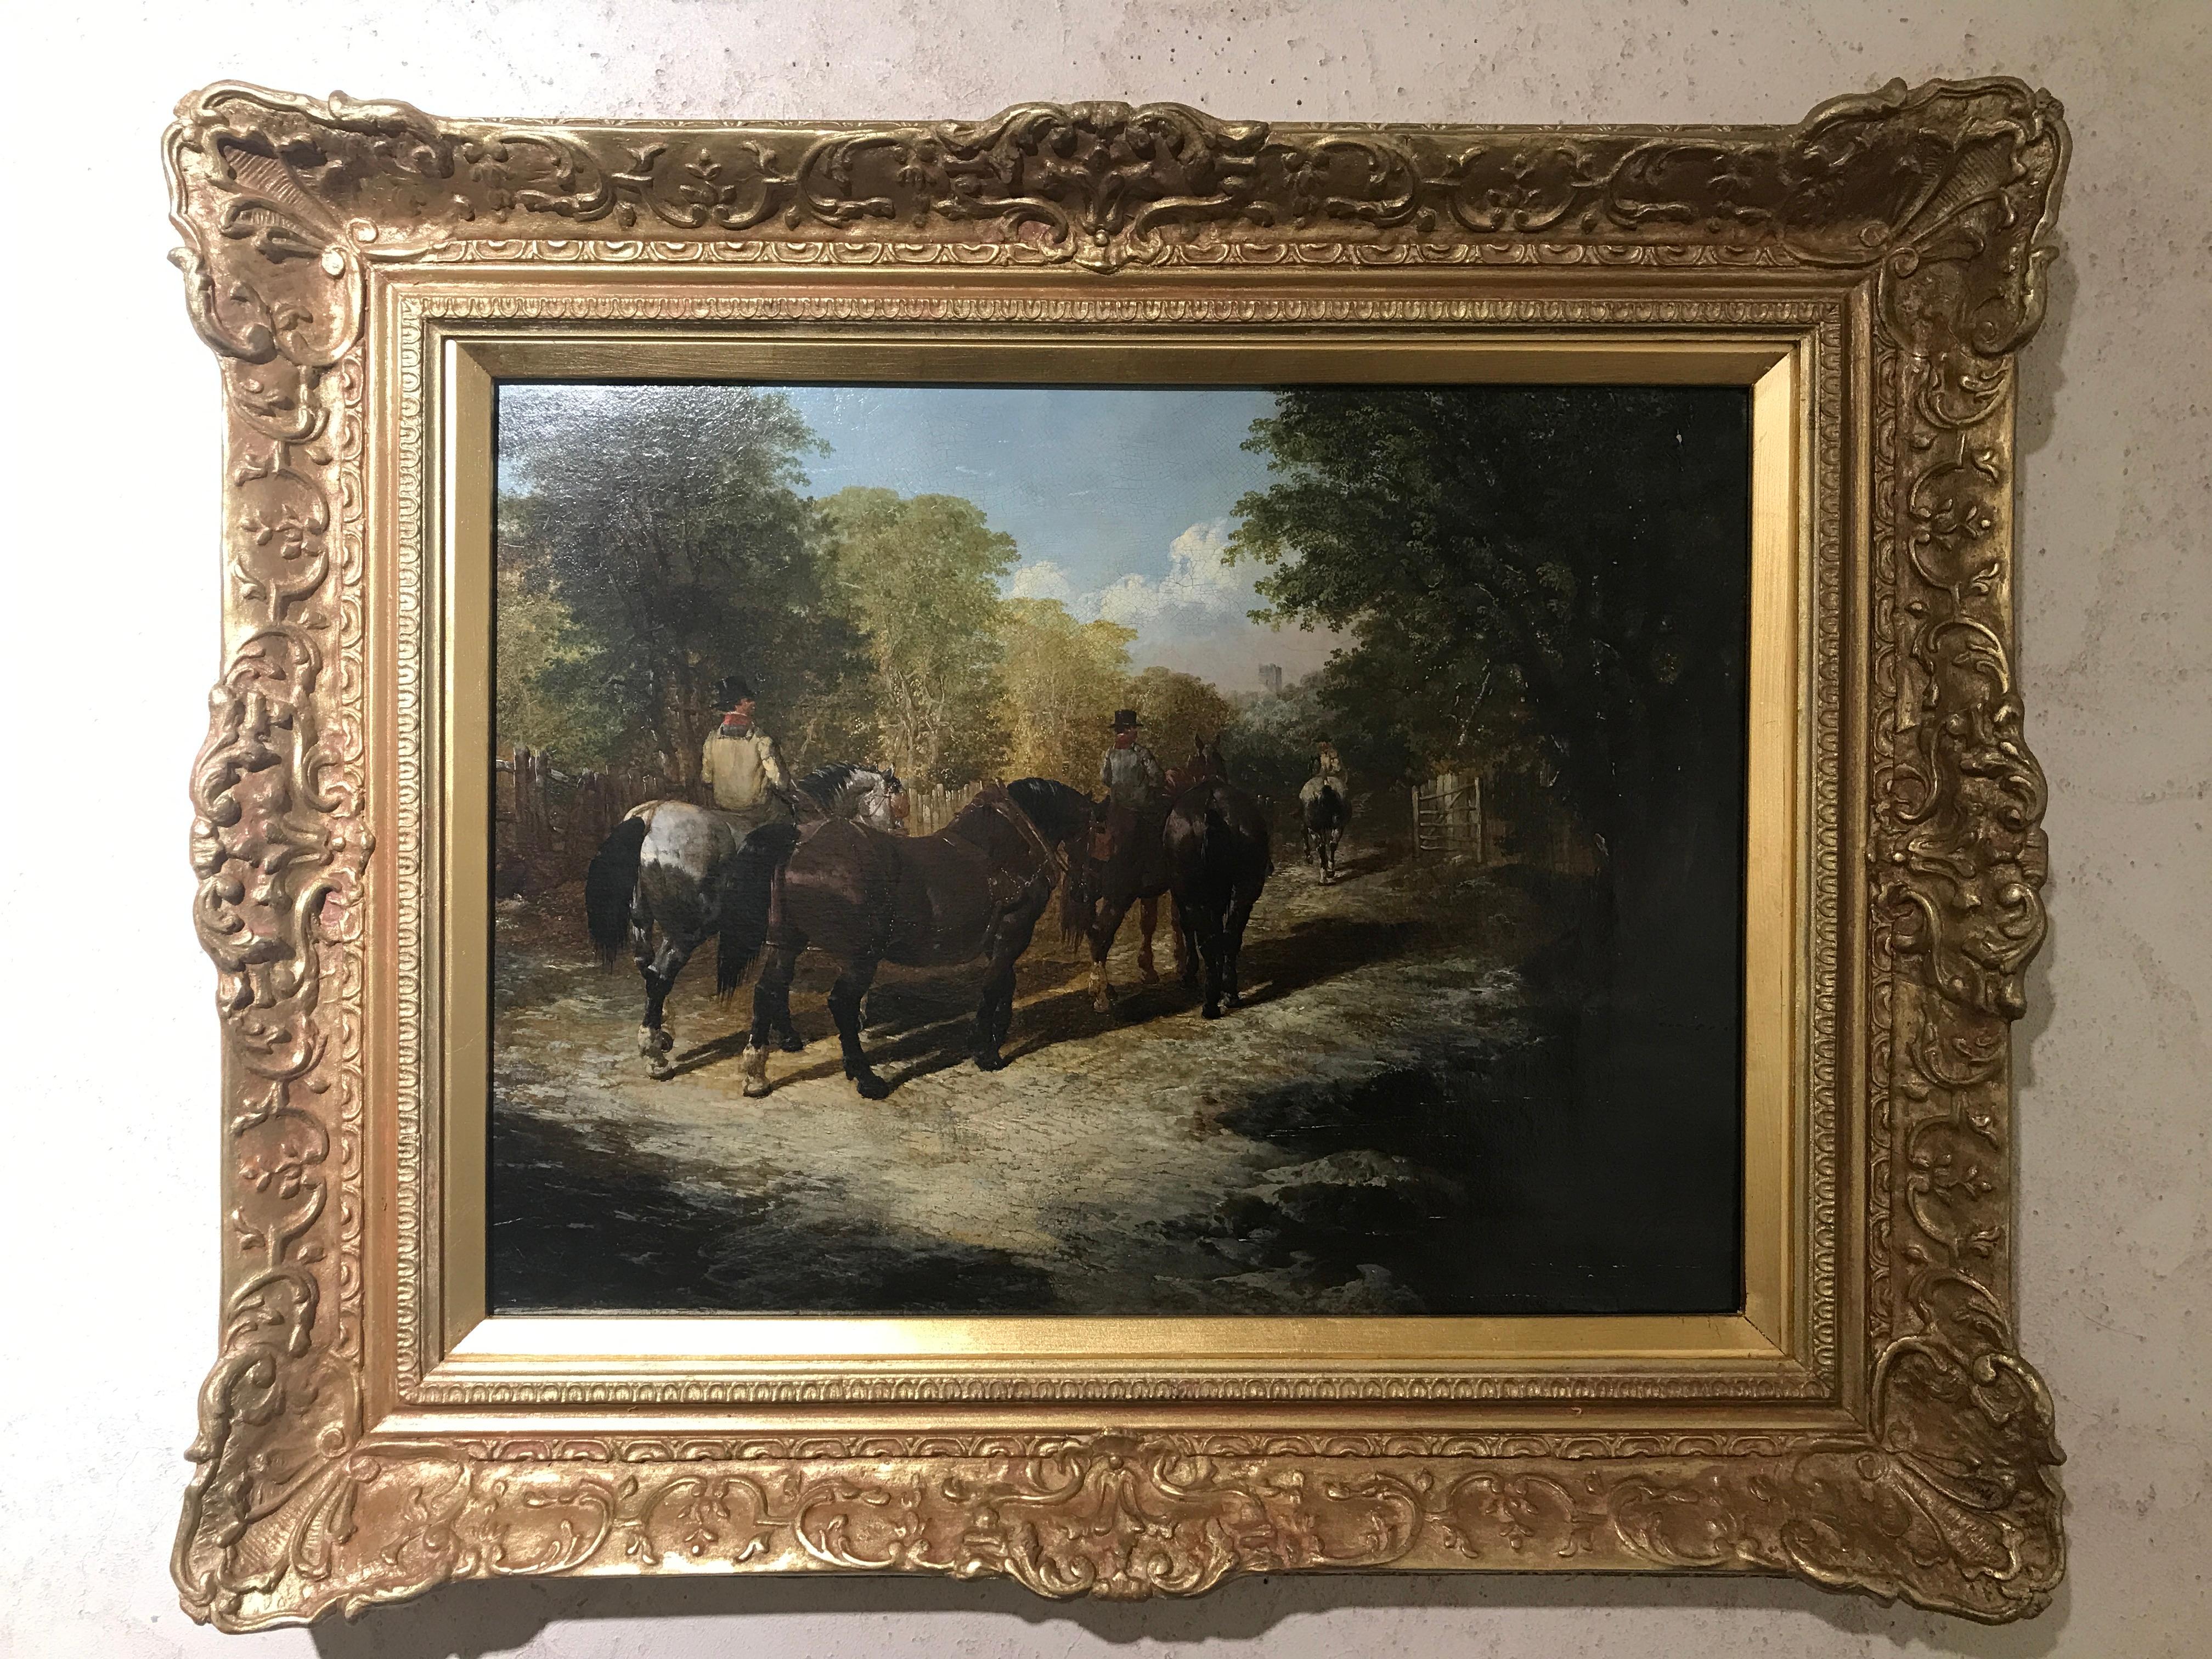 Signed & dated 1849 (illegible stickers & notes en verso)

John Frederick Herring Jr. was an English painter who is best known for his horse paintings.